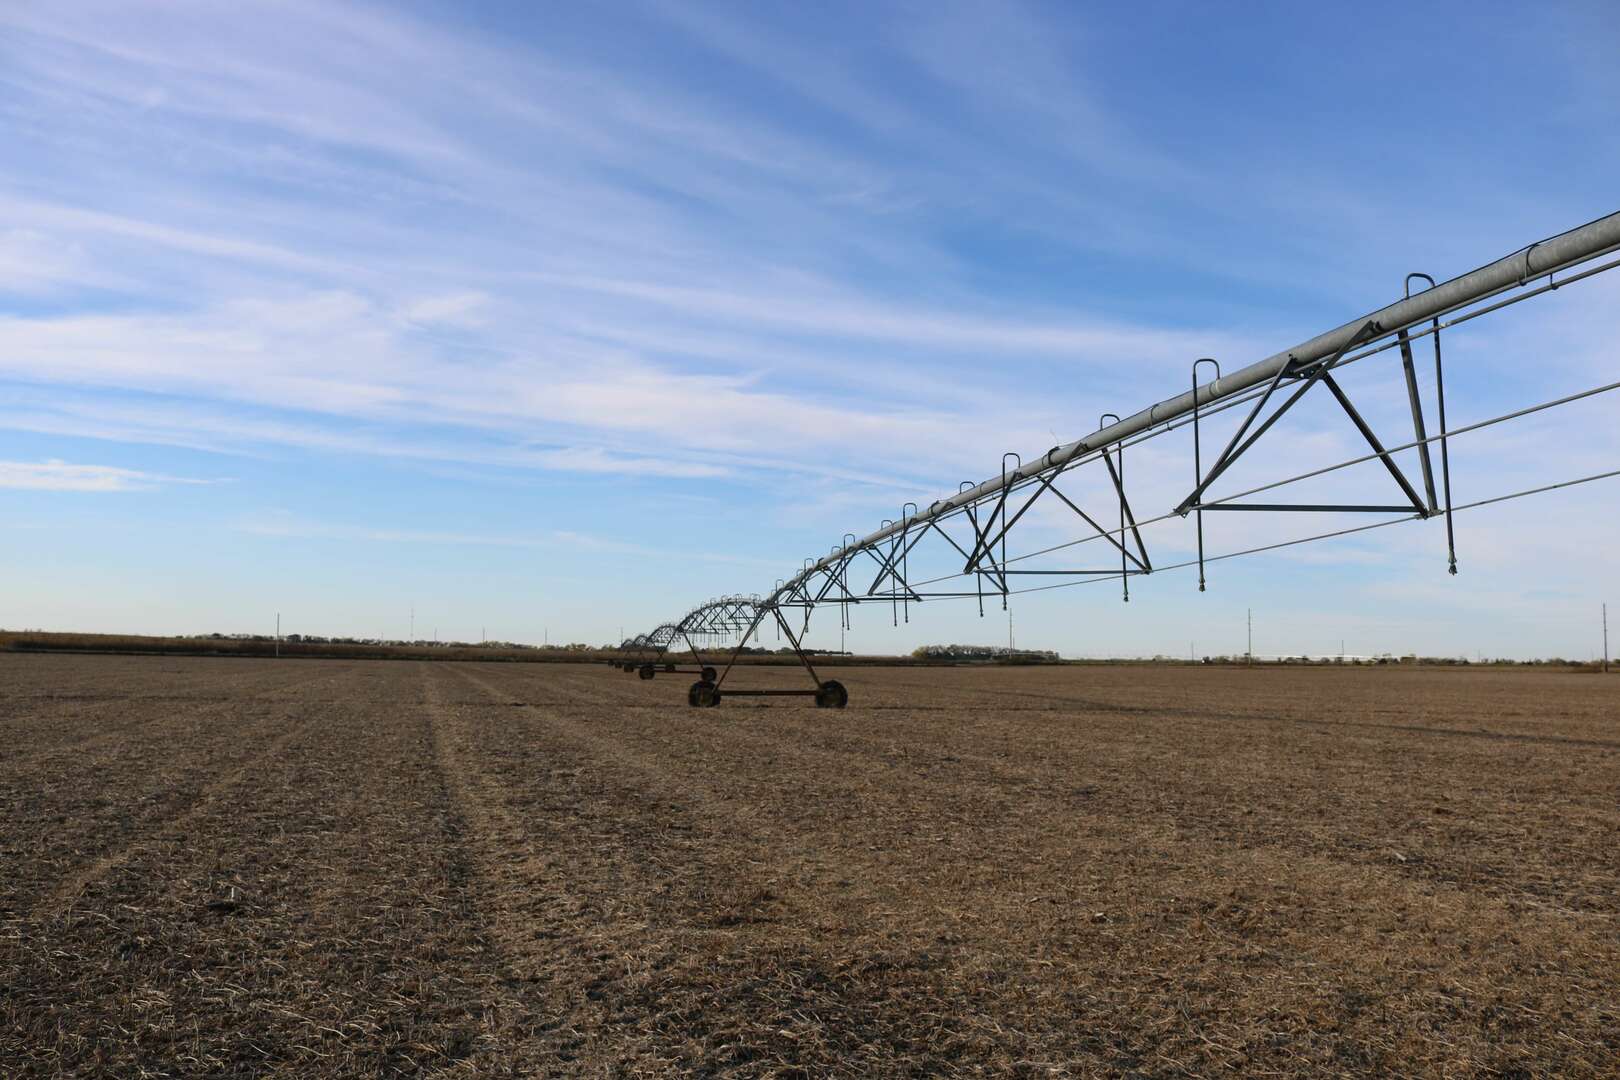 A view of a large farming irrigation system in the middle of a dry brown field with blue skies overhead